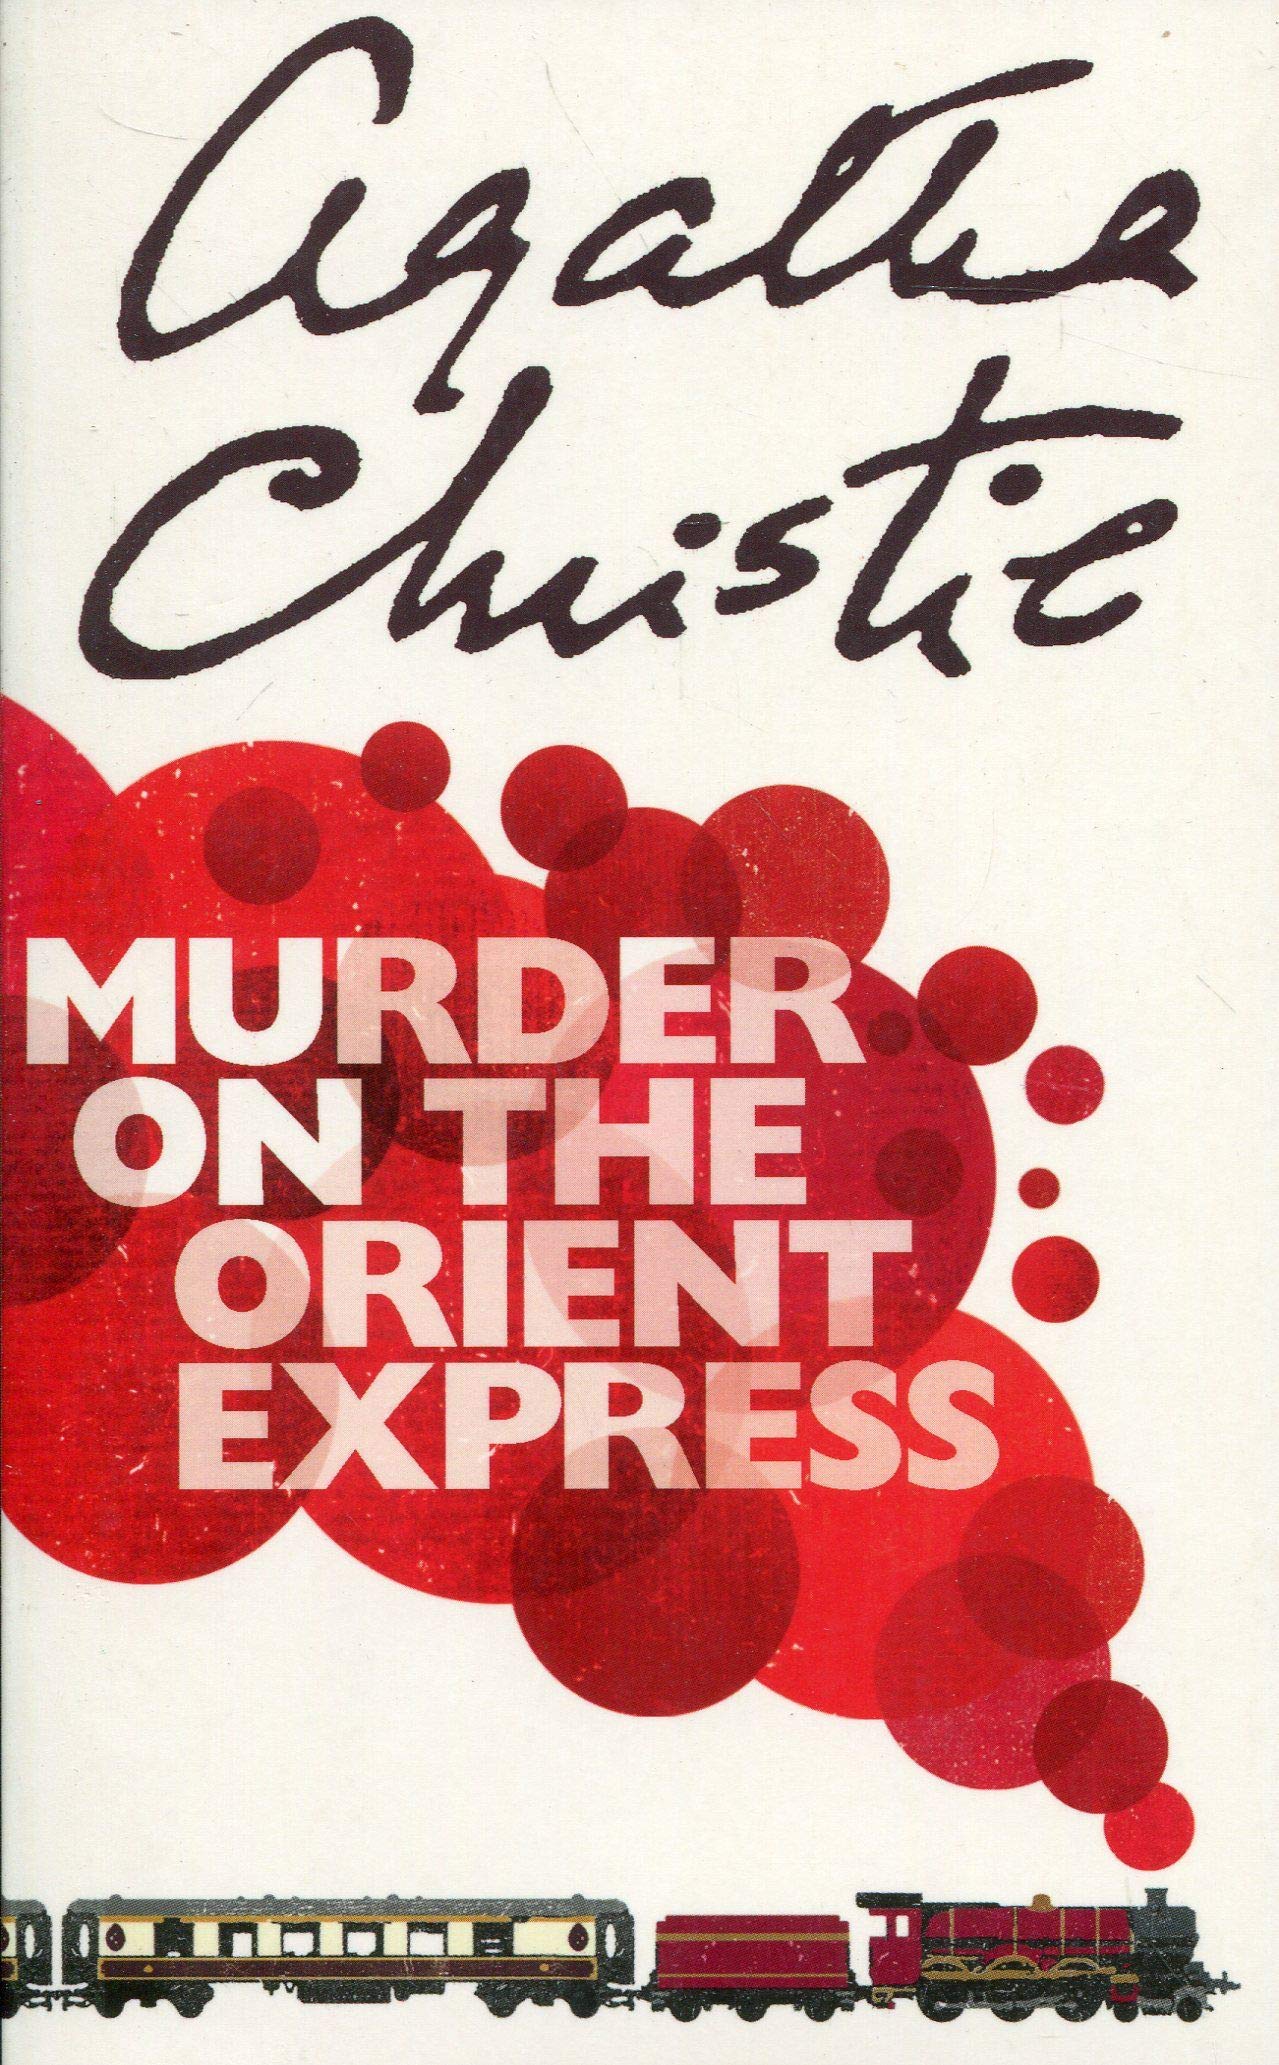 Image depicts cover of 'Murder of the Orient Express' by Agatha Christie. This cover shows a train with billowing red smoke from the smokestack and lists 'Murder on the Orient Express' in the smoke. Agatha Christie is listed as the author.